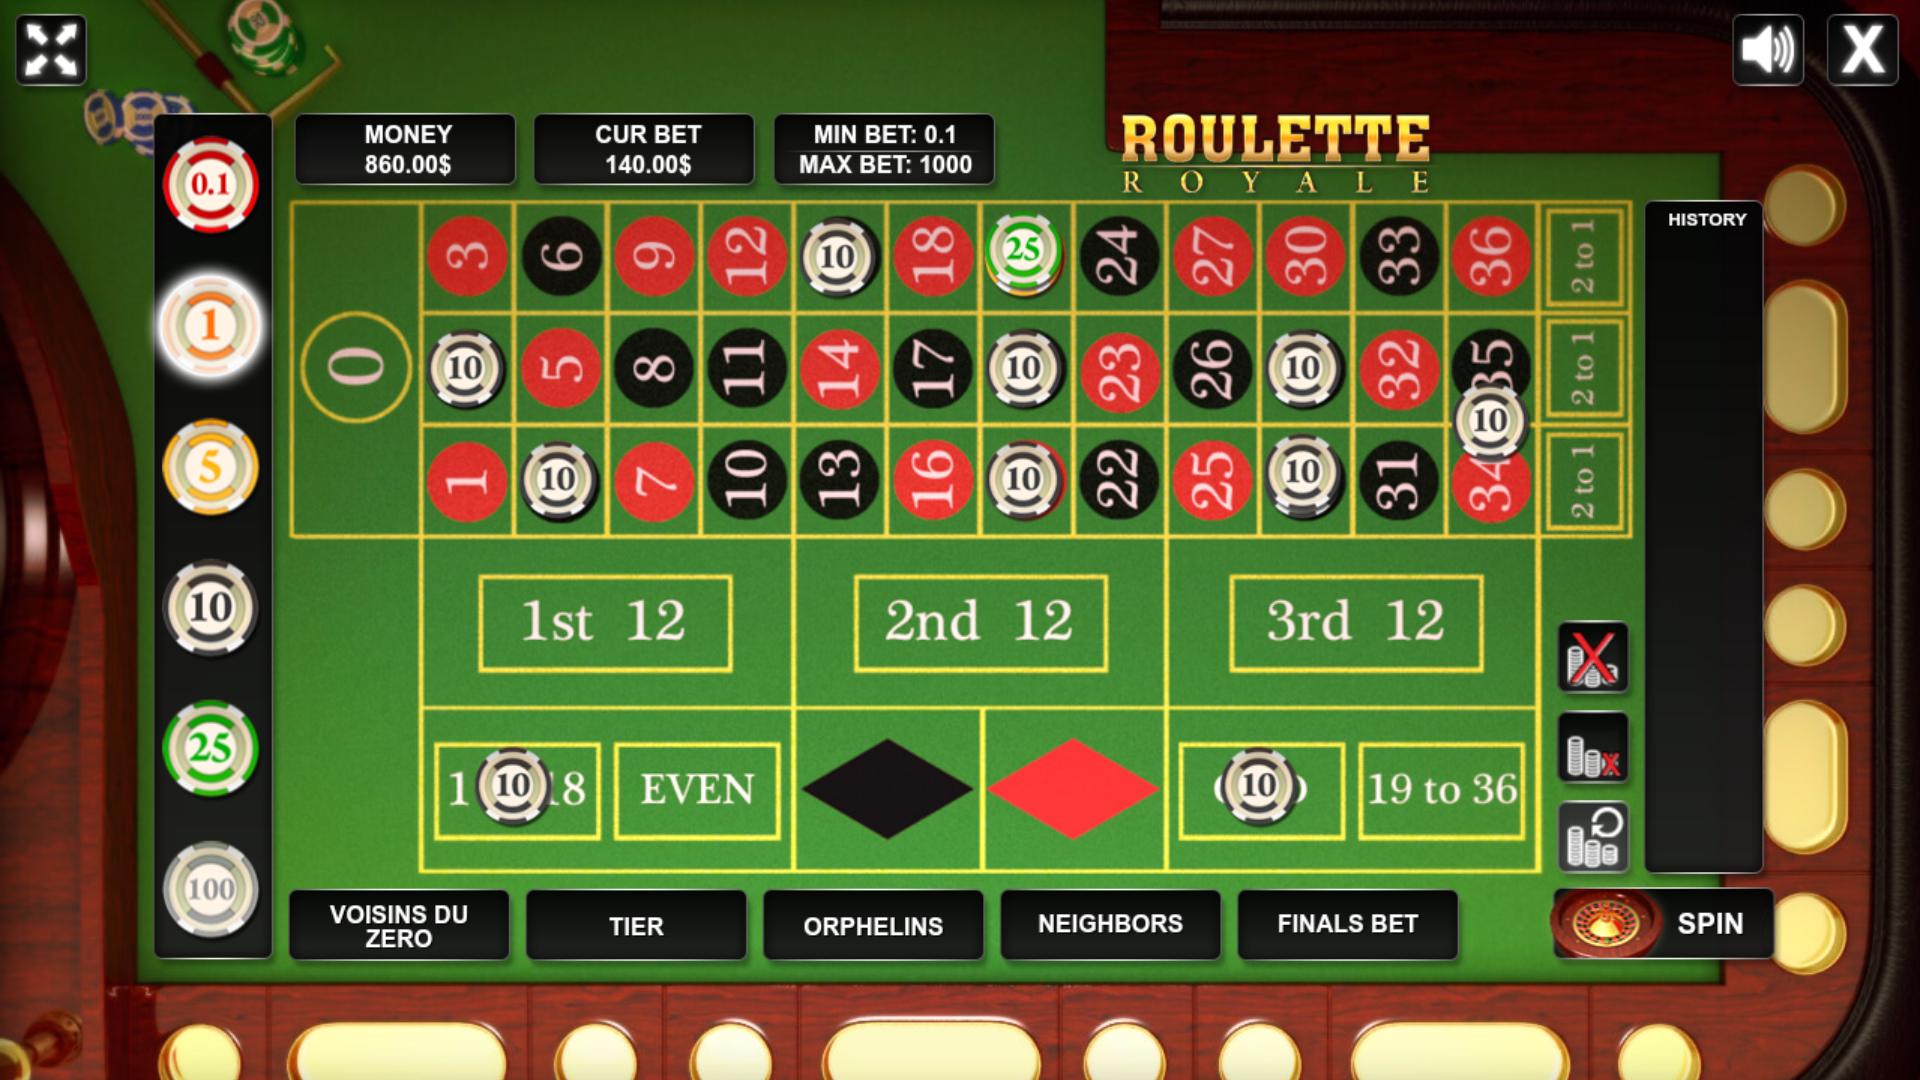 Play roulette games. Рулетка казино. Casino Roulette. Html Рулетка игра казино. Roulette Royale.